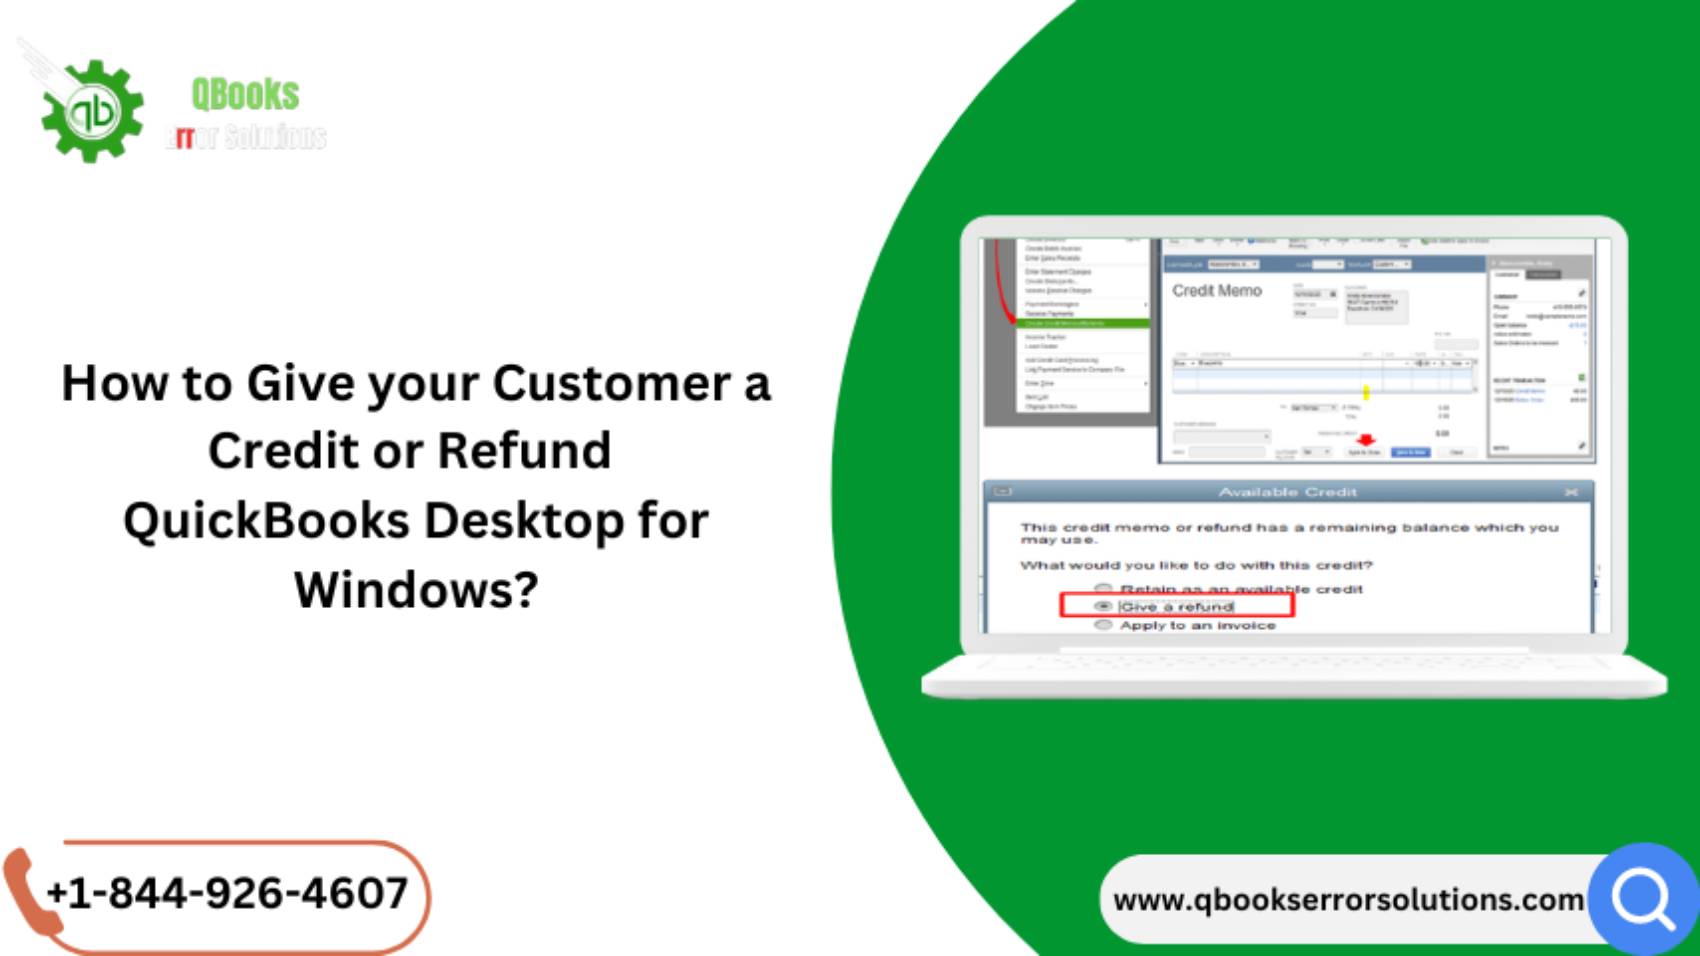 Quick Guide to Give your Customer a Credit or Refund QuickBooks Desktop for Windows